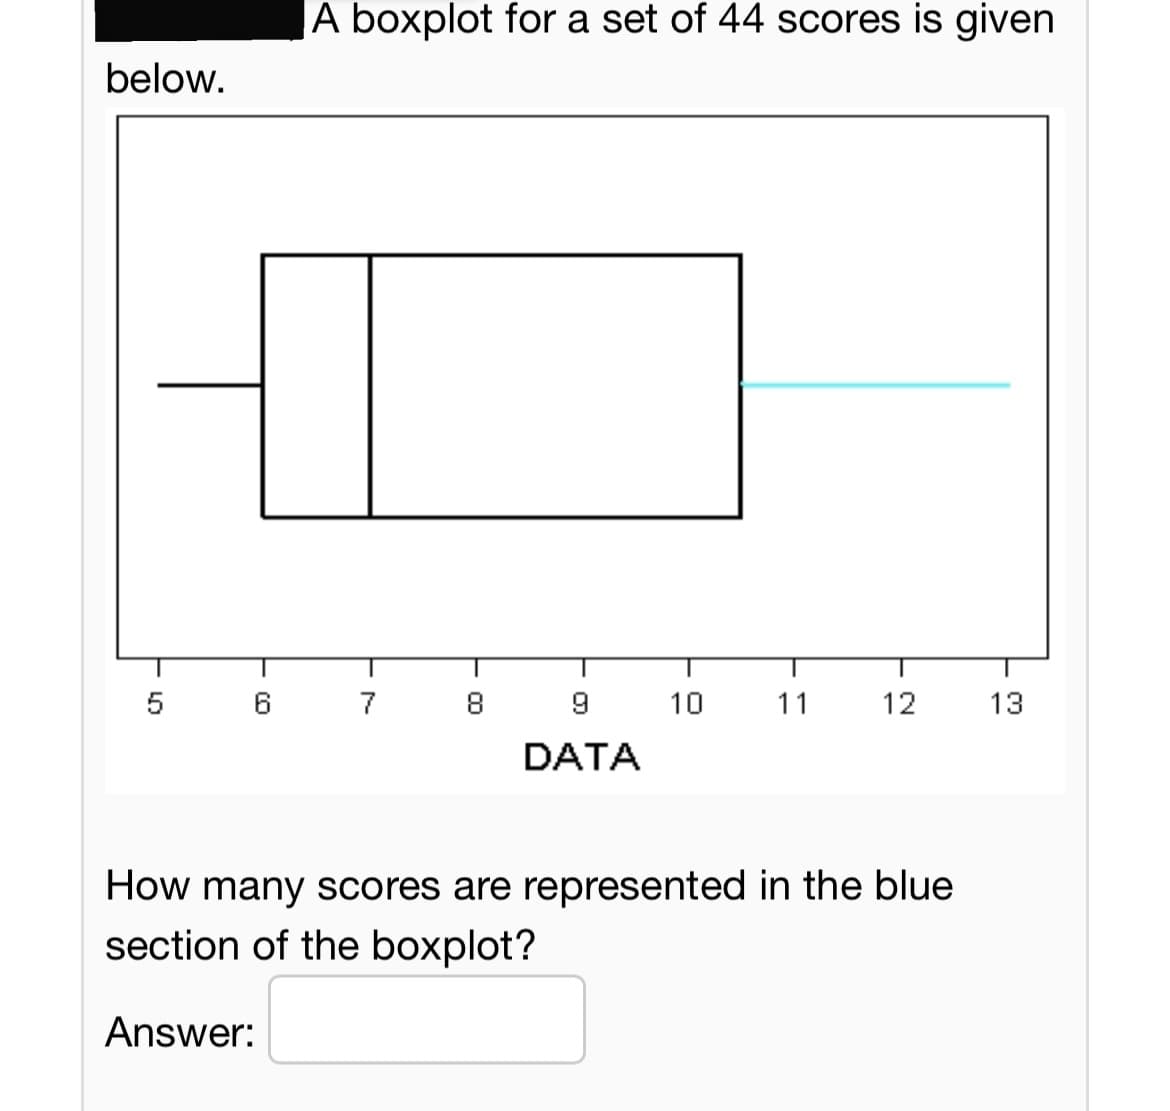 below.
01
5
6
A boxplot for a set of 44 scores is given
7
8
9
DATA
10
T
11
12
How many scores are represented in the blue
section of the boxplot?
Answer:
13